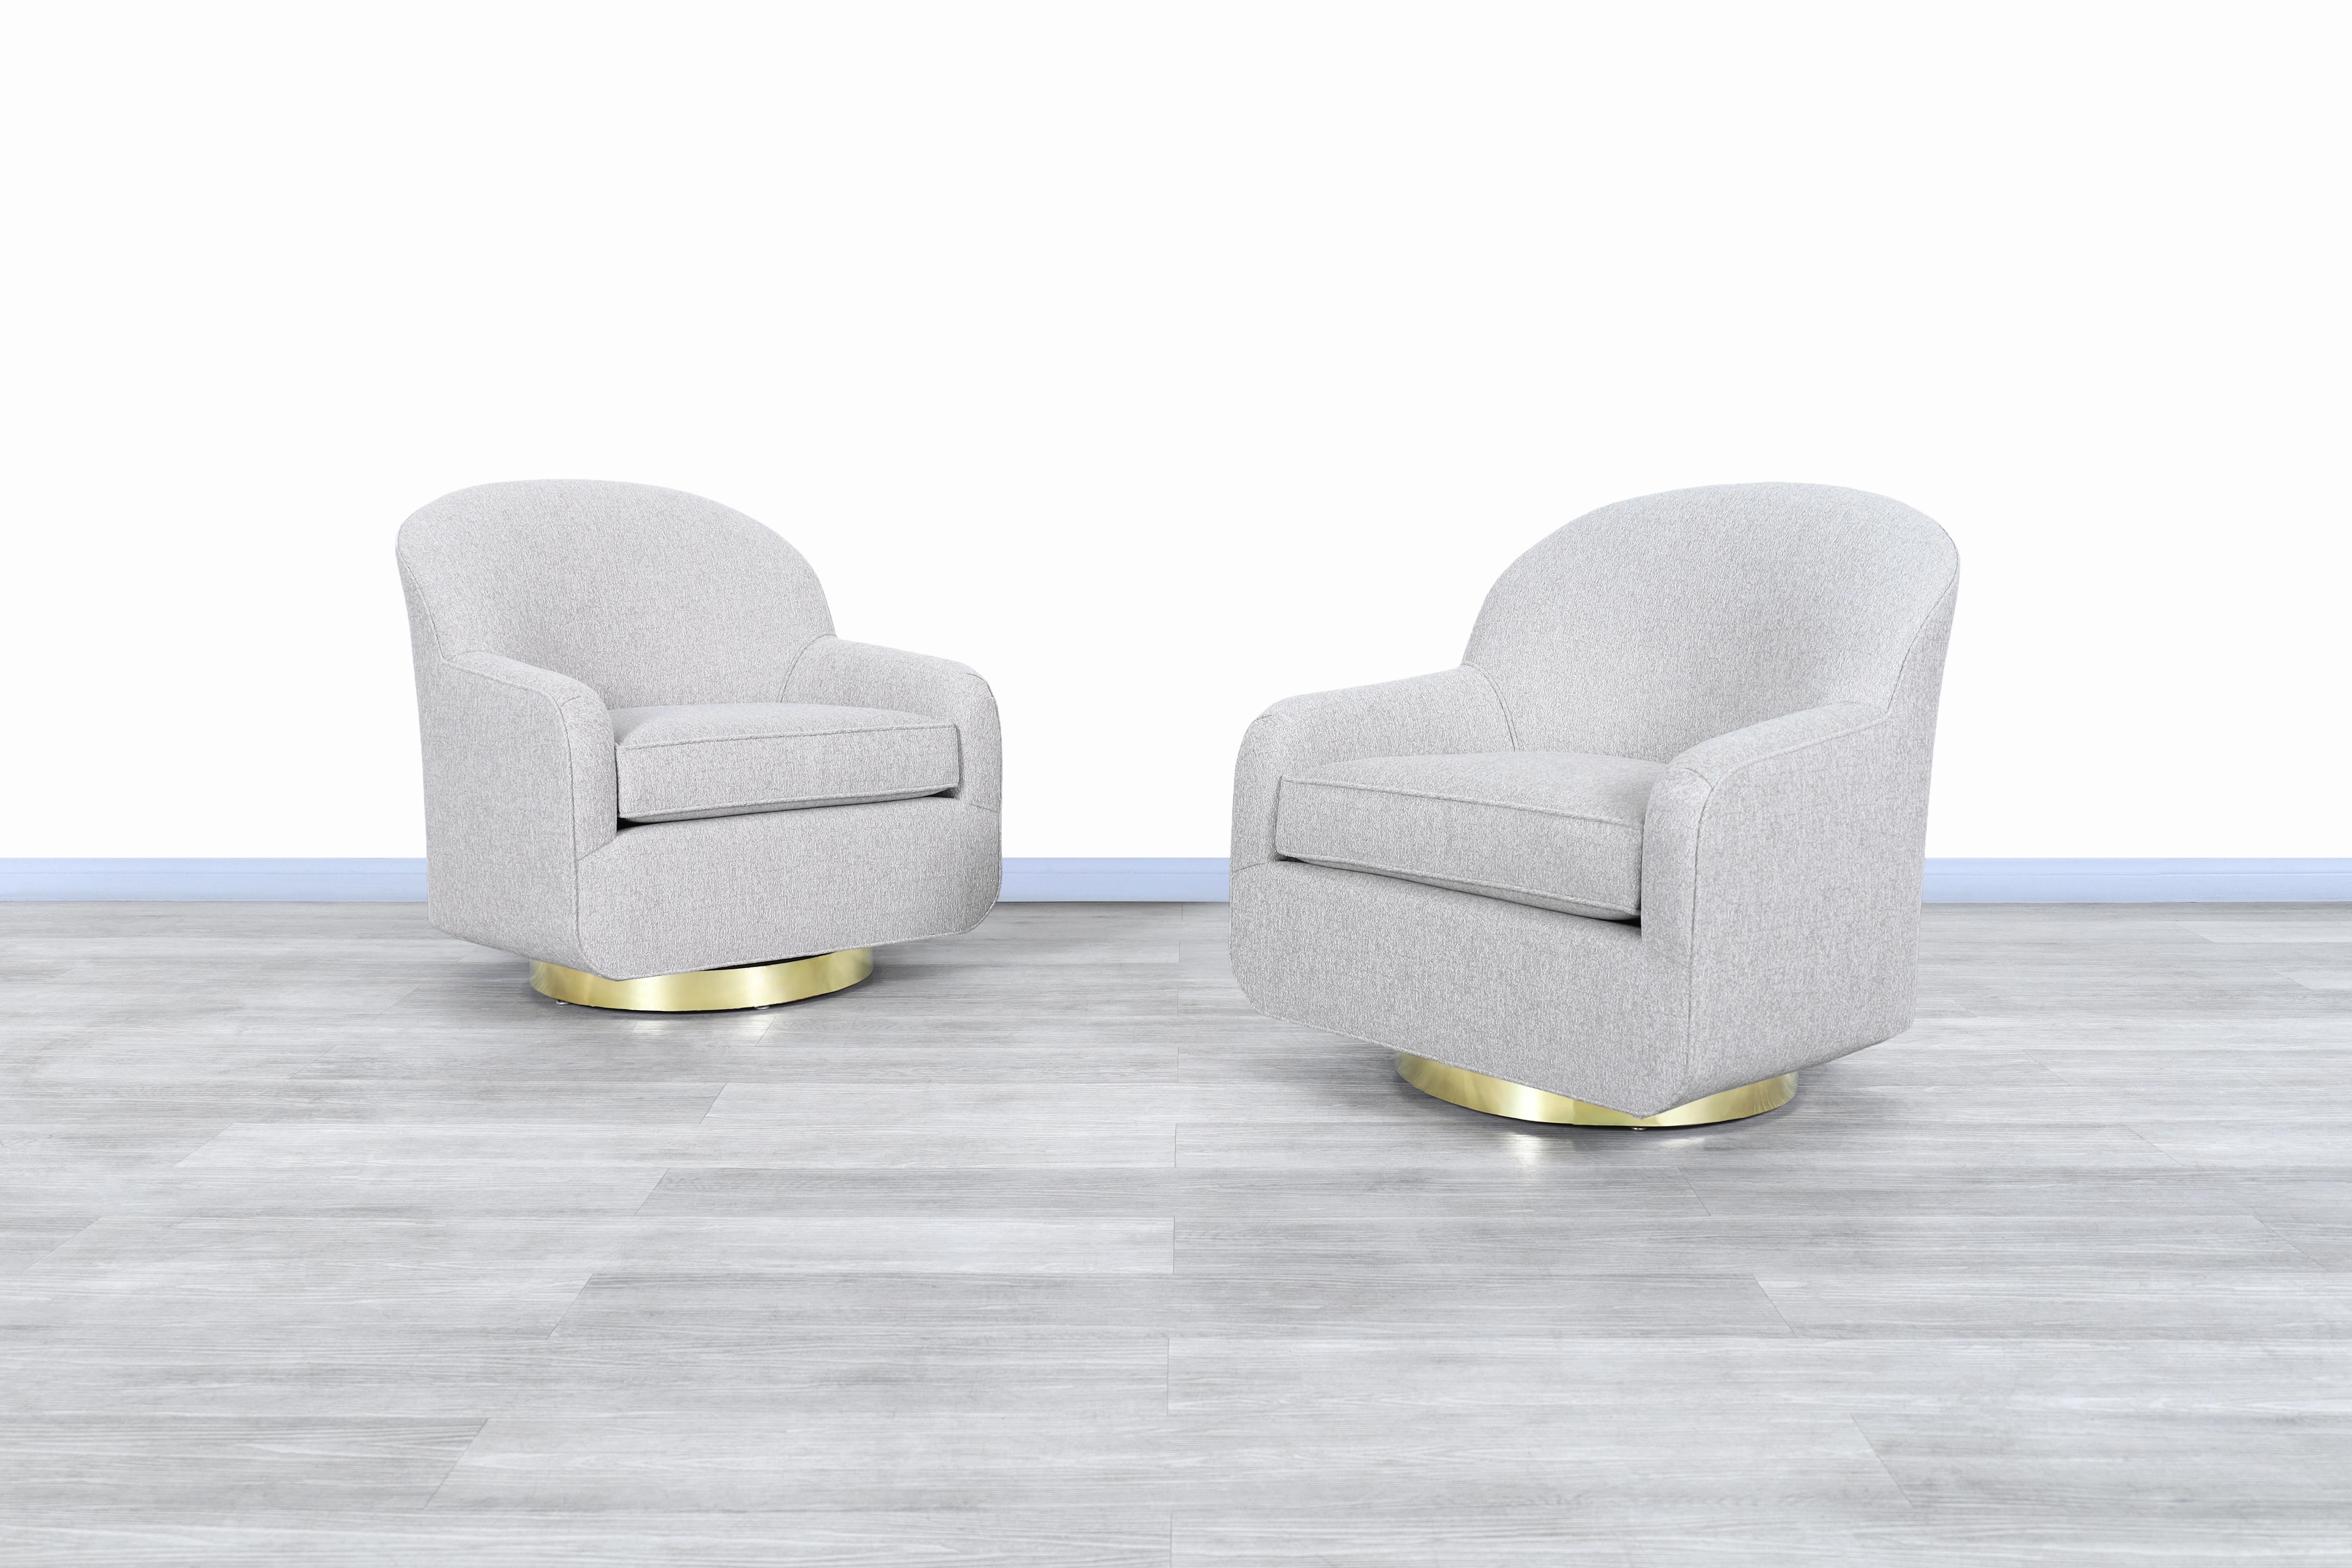 Stunning vintage brass swivel lounge chairs designed and manufactured by Directional in the United States, circa 1970s. These chairs represent the style of Milo Baughman’s modern and sophisticated designs. Each chair has been professionally